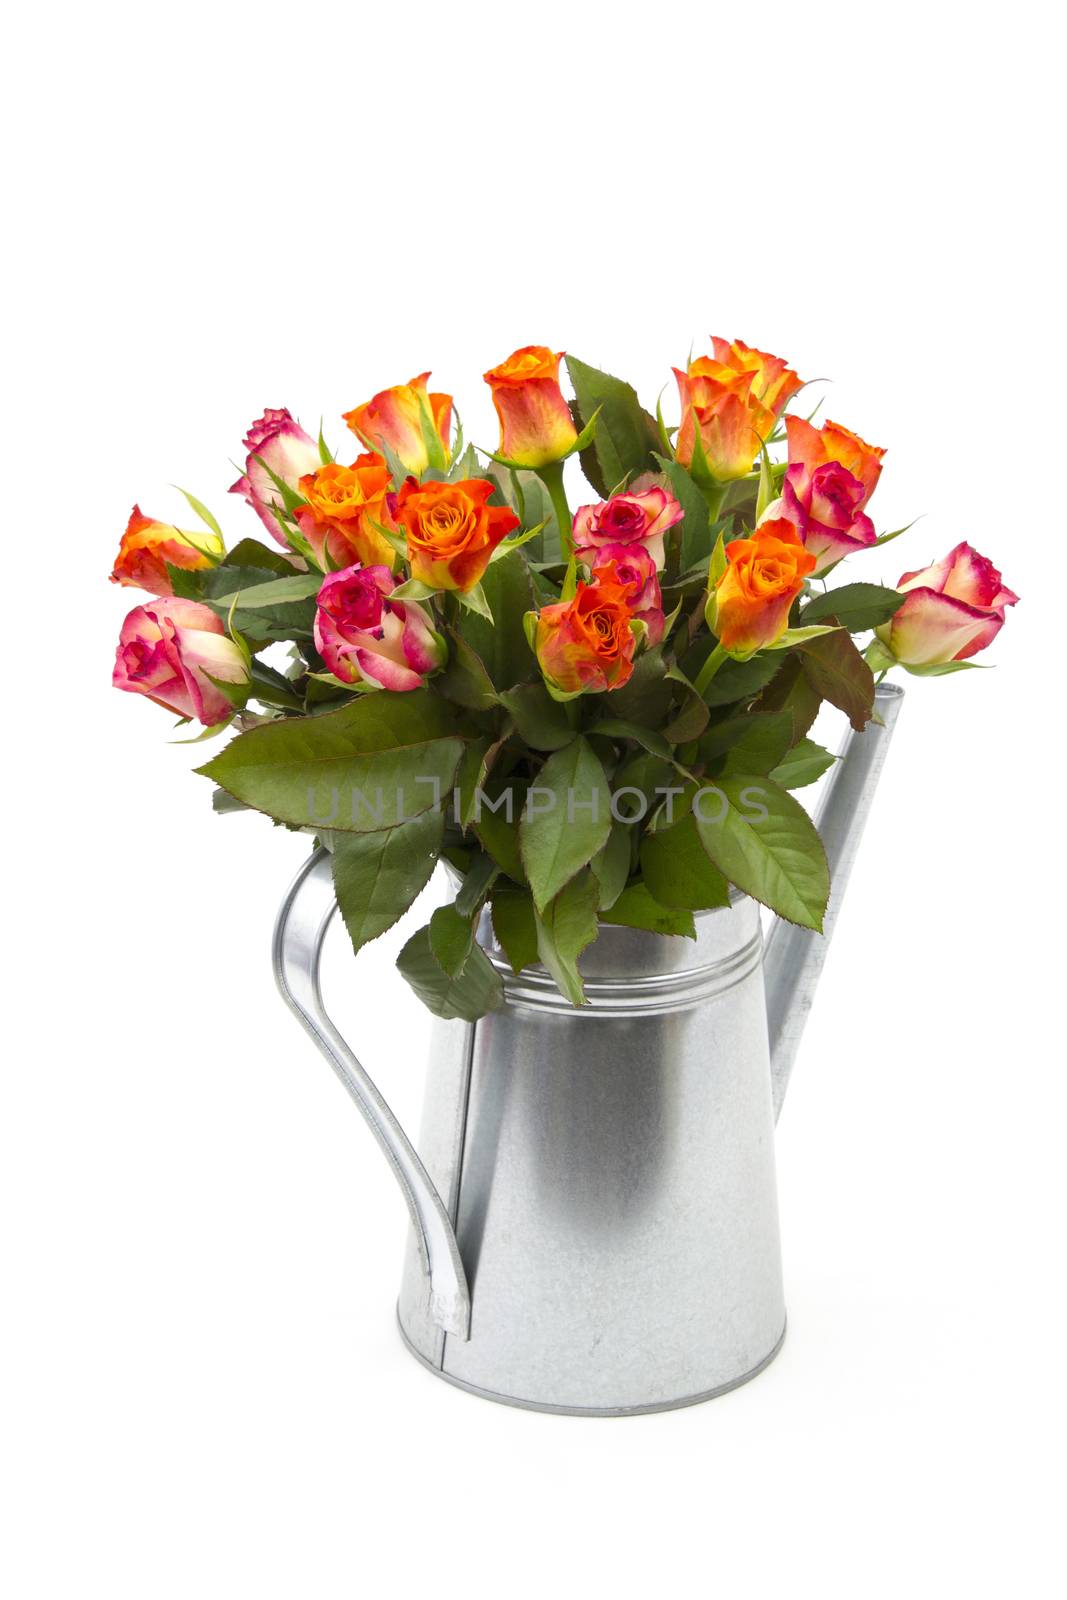 roses in a watering can on white background